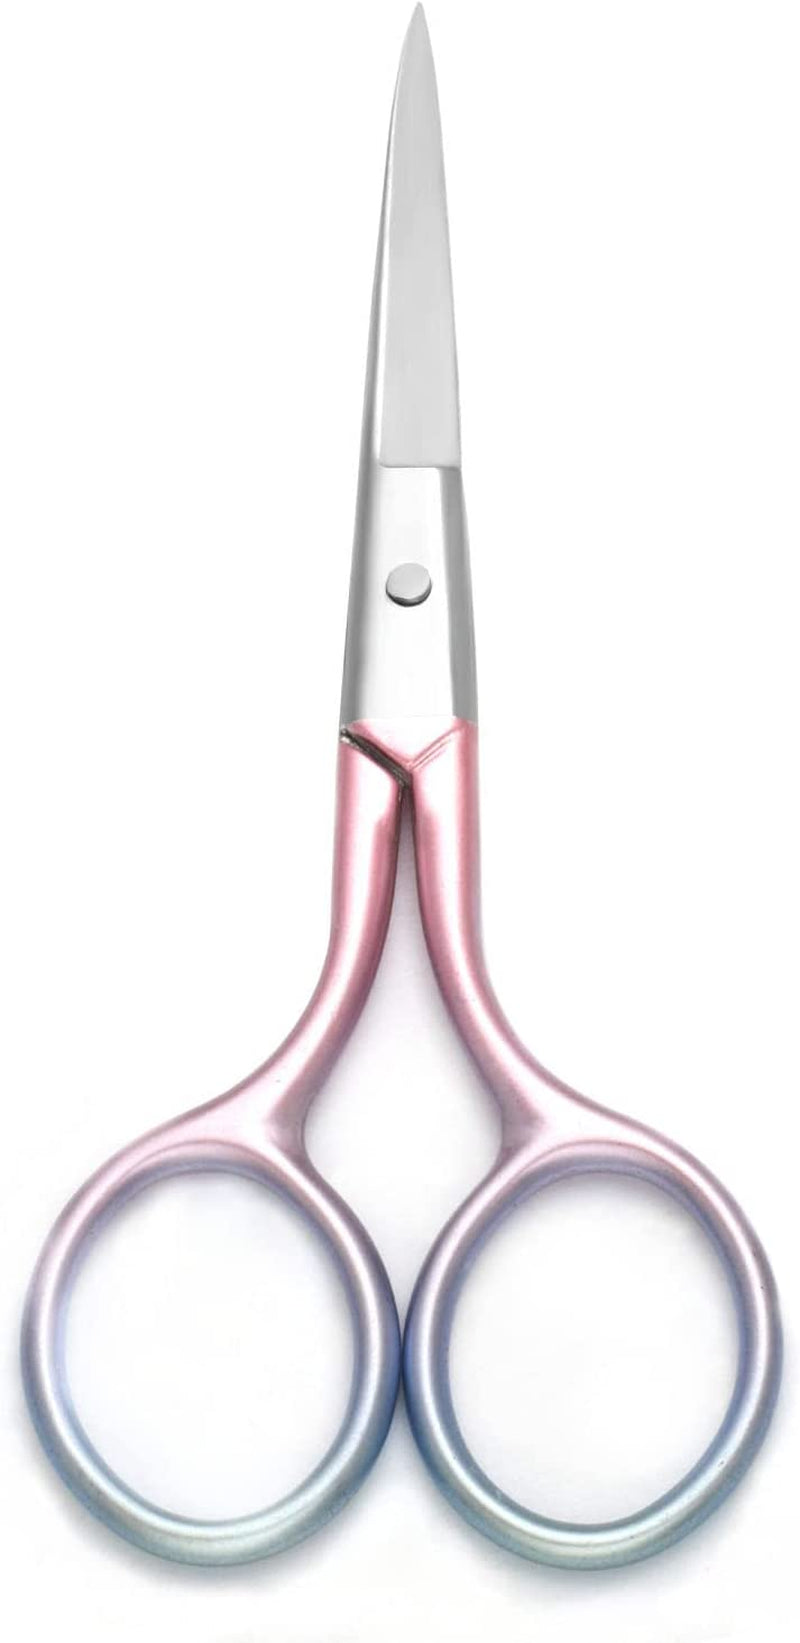 Multicolor Professional Grooming Scissors for Personal Care Facial Hair Removal and Ear Nose Eyebrow Trimming Stainless Steel Fine Straight Tip Scissors 3.9 Inch (Pink)